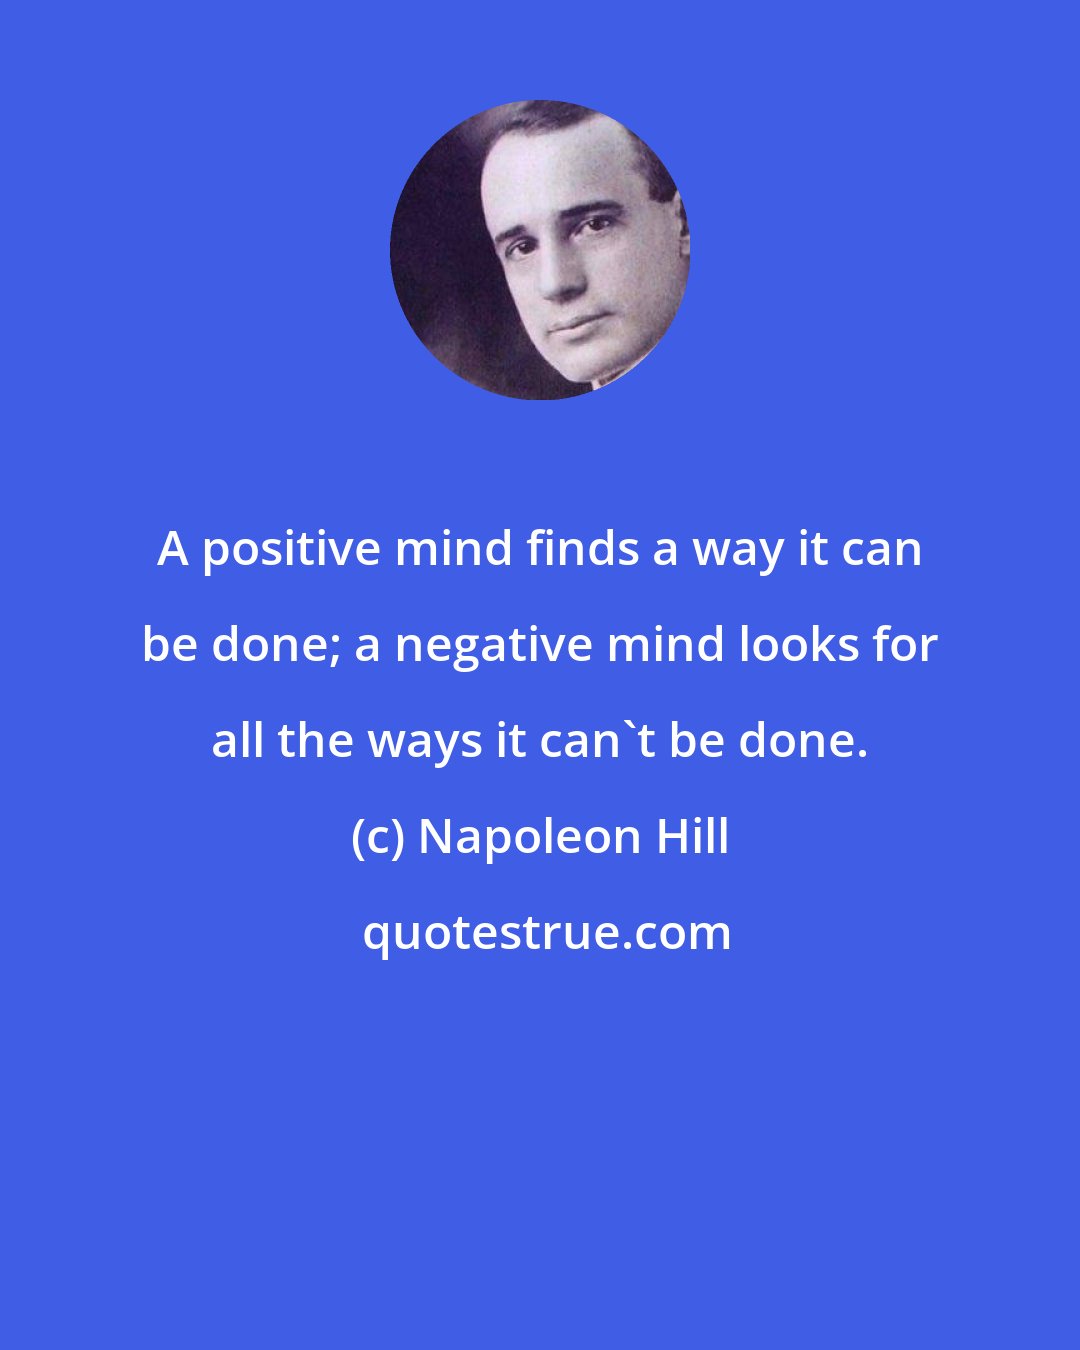 Napoleon Hill: A positive mind finds a way it can be done; a negative mind looks for all the ways it can't be done.